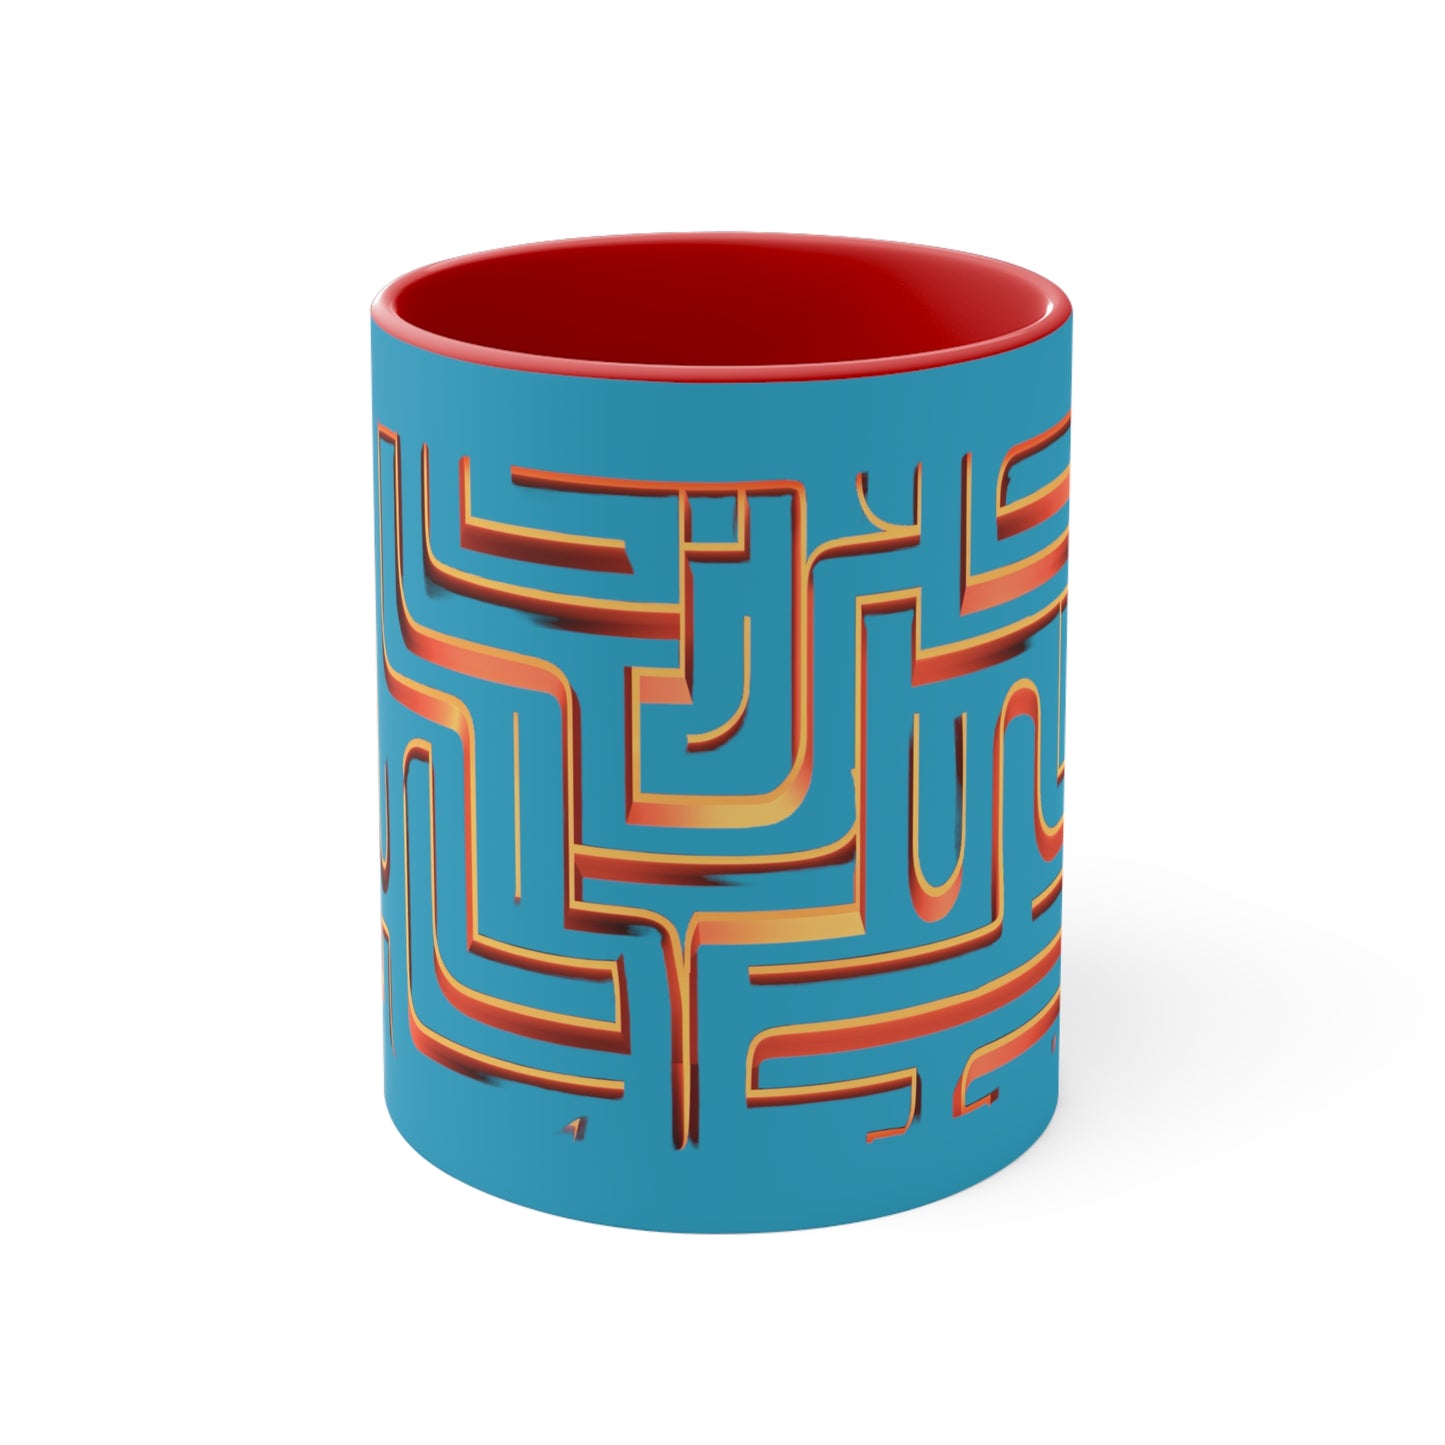 Maze in Turquoise